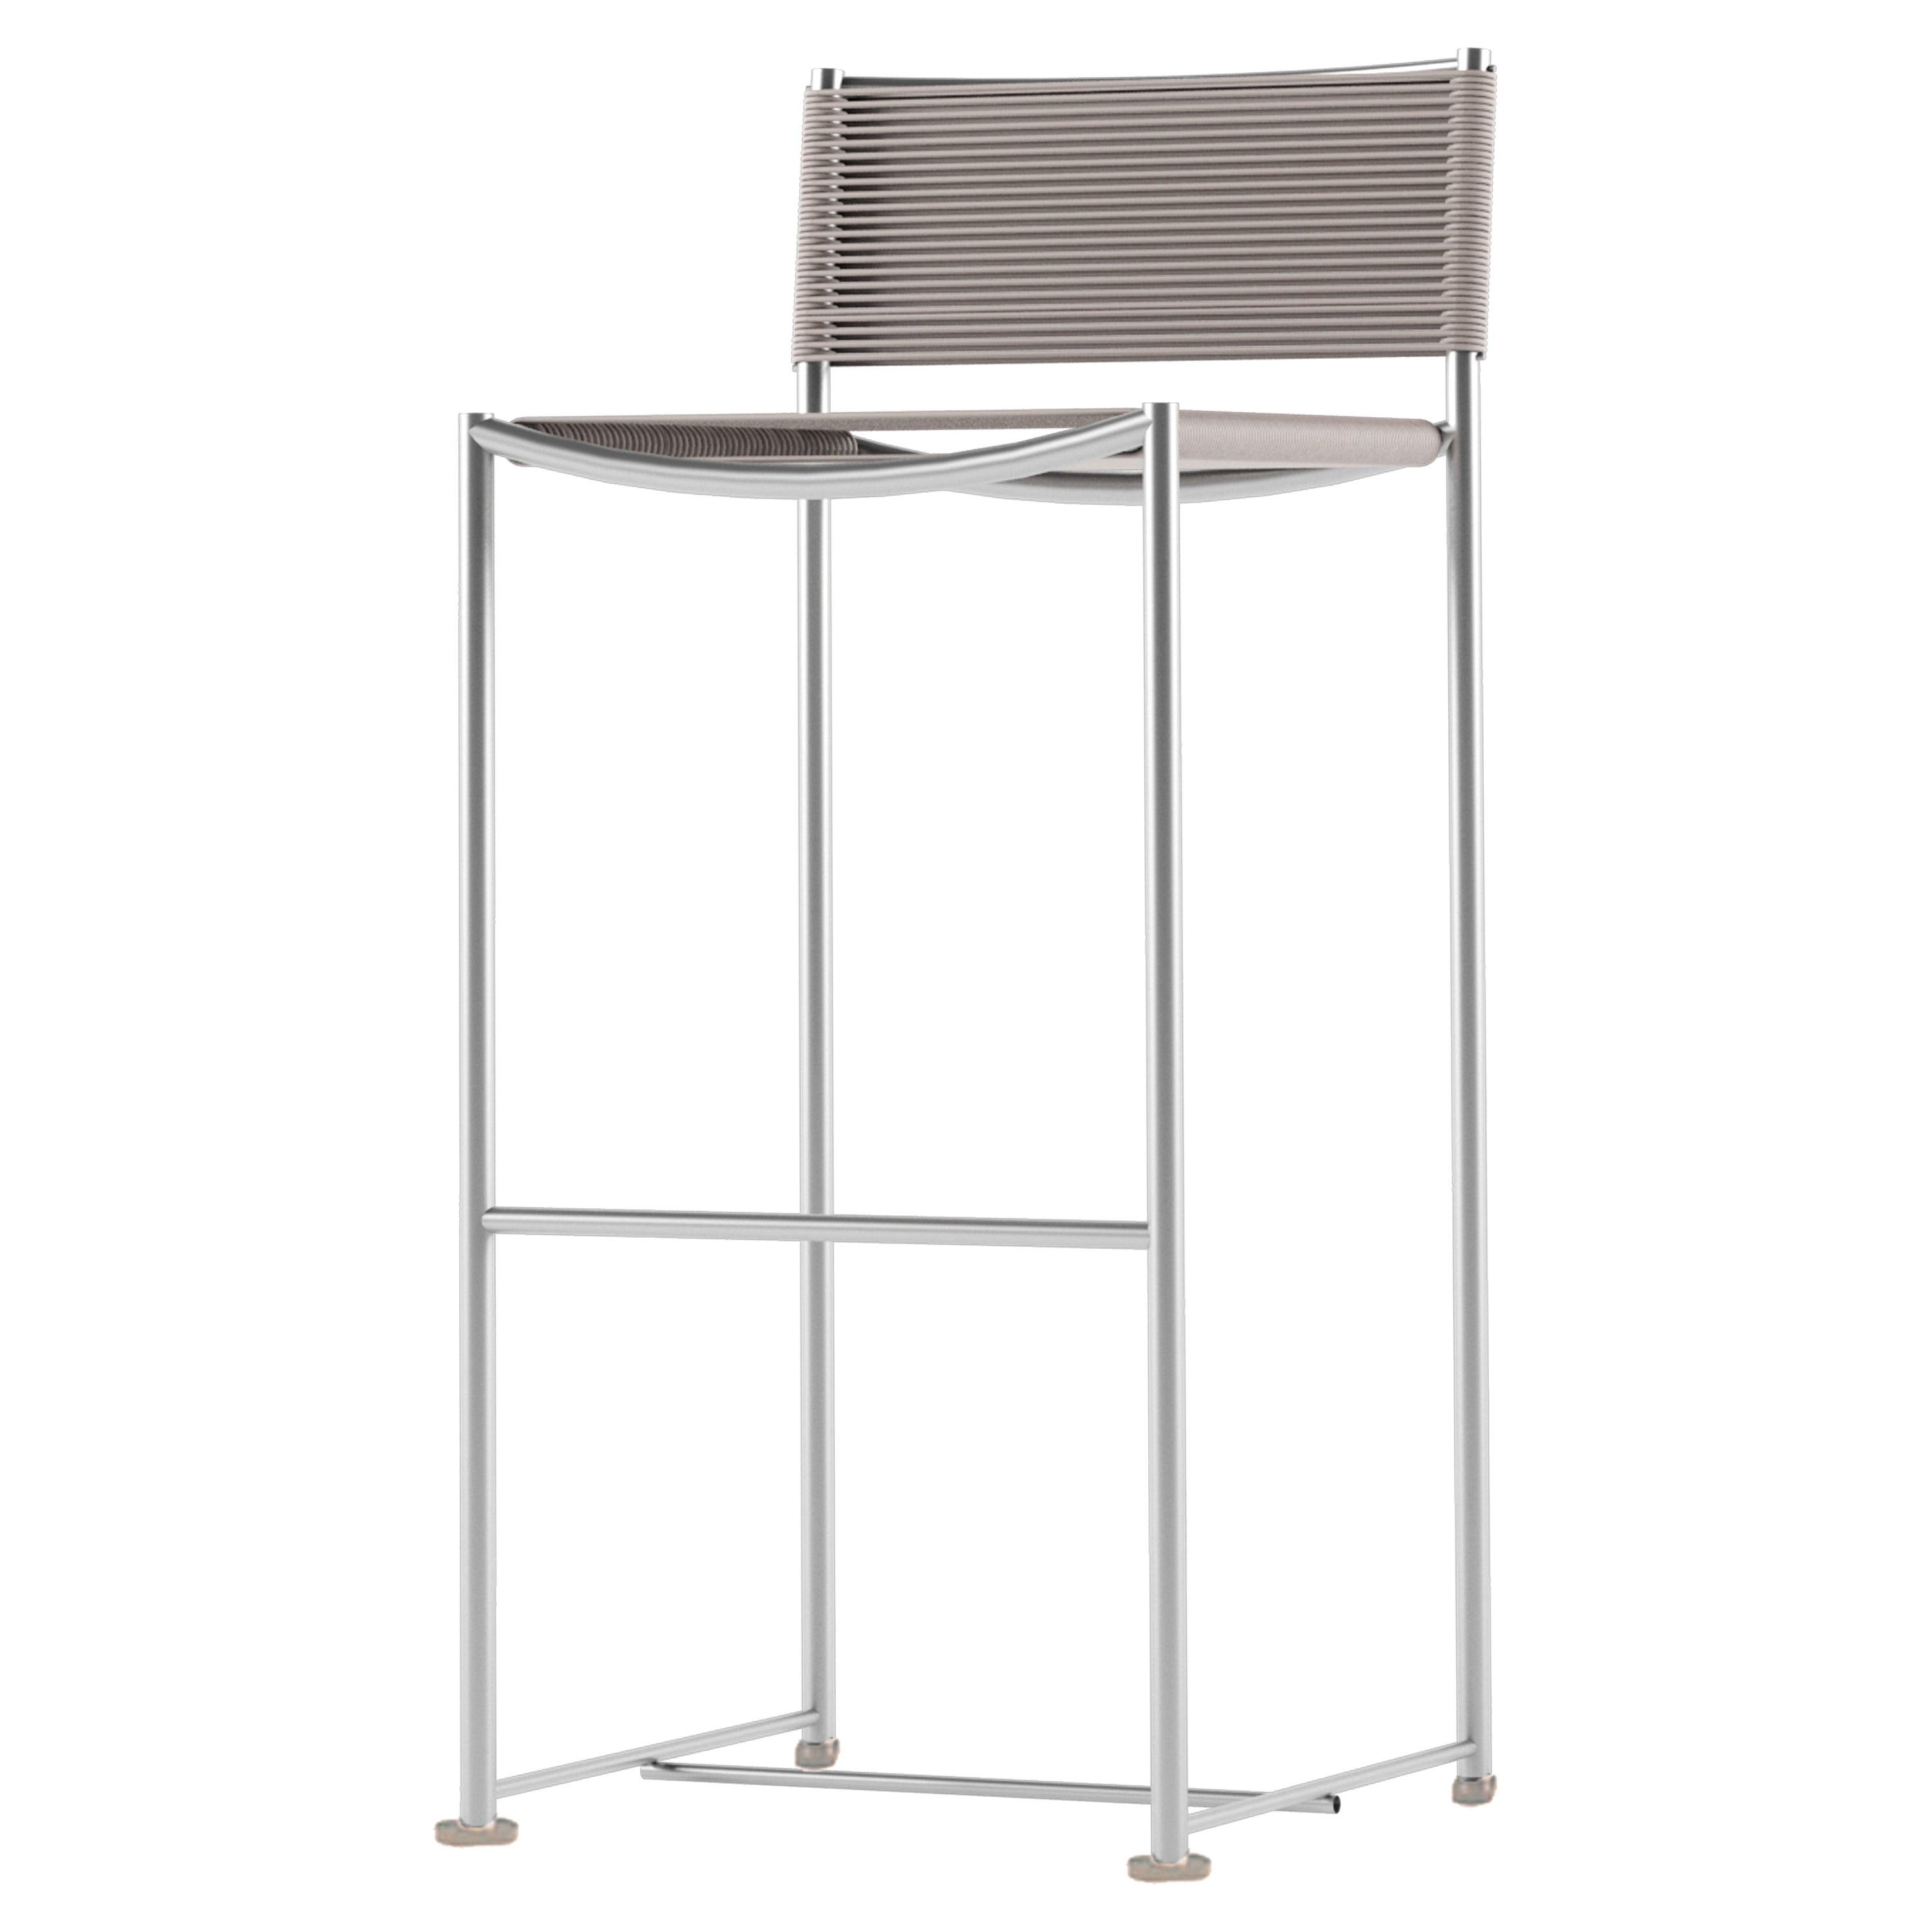 Alias 205_O Green PVC Outdoor High Stool in Beige with Steel Frame